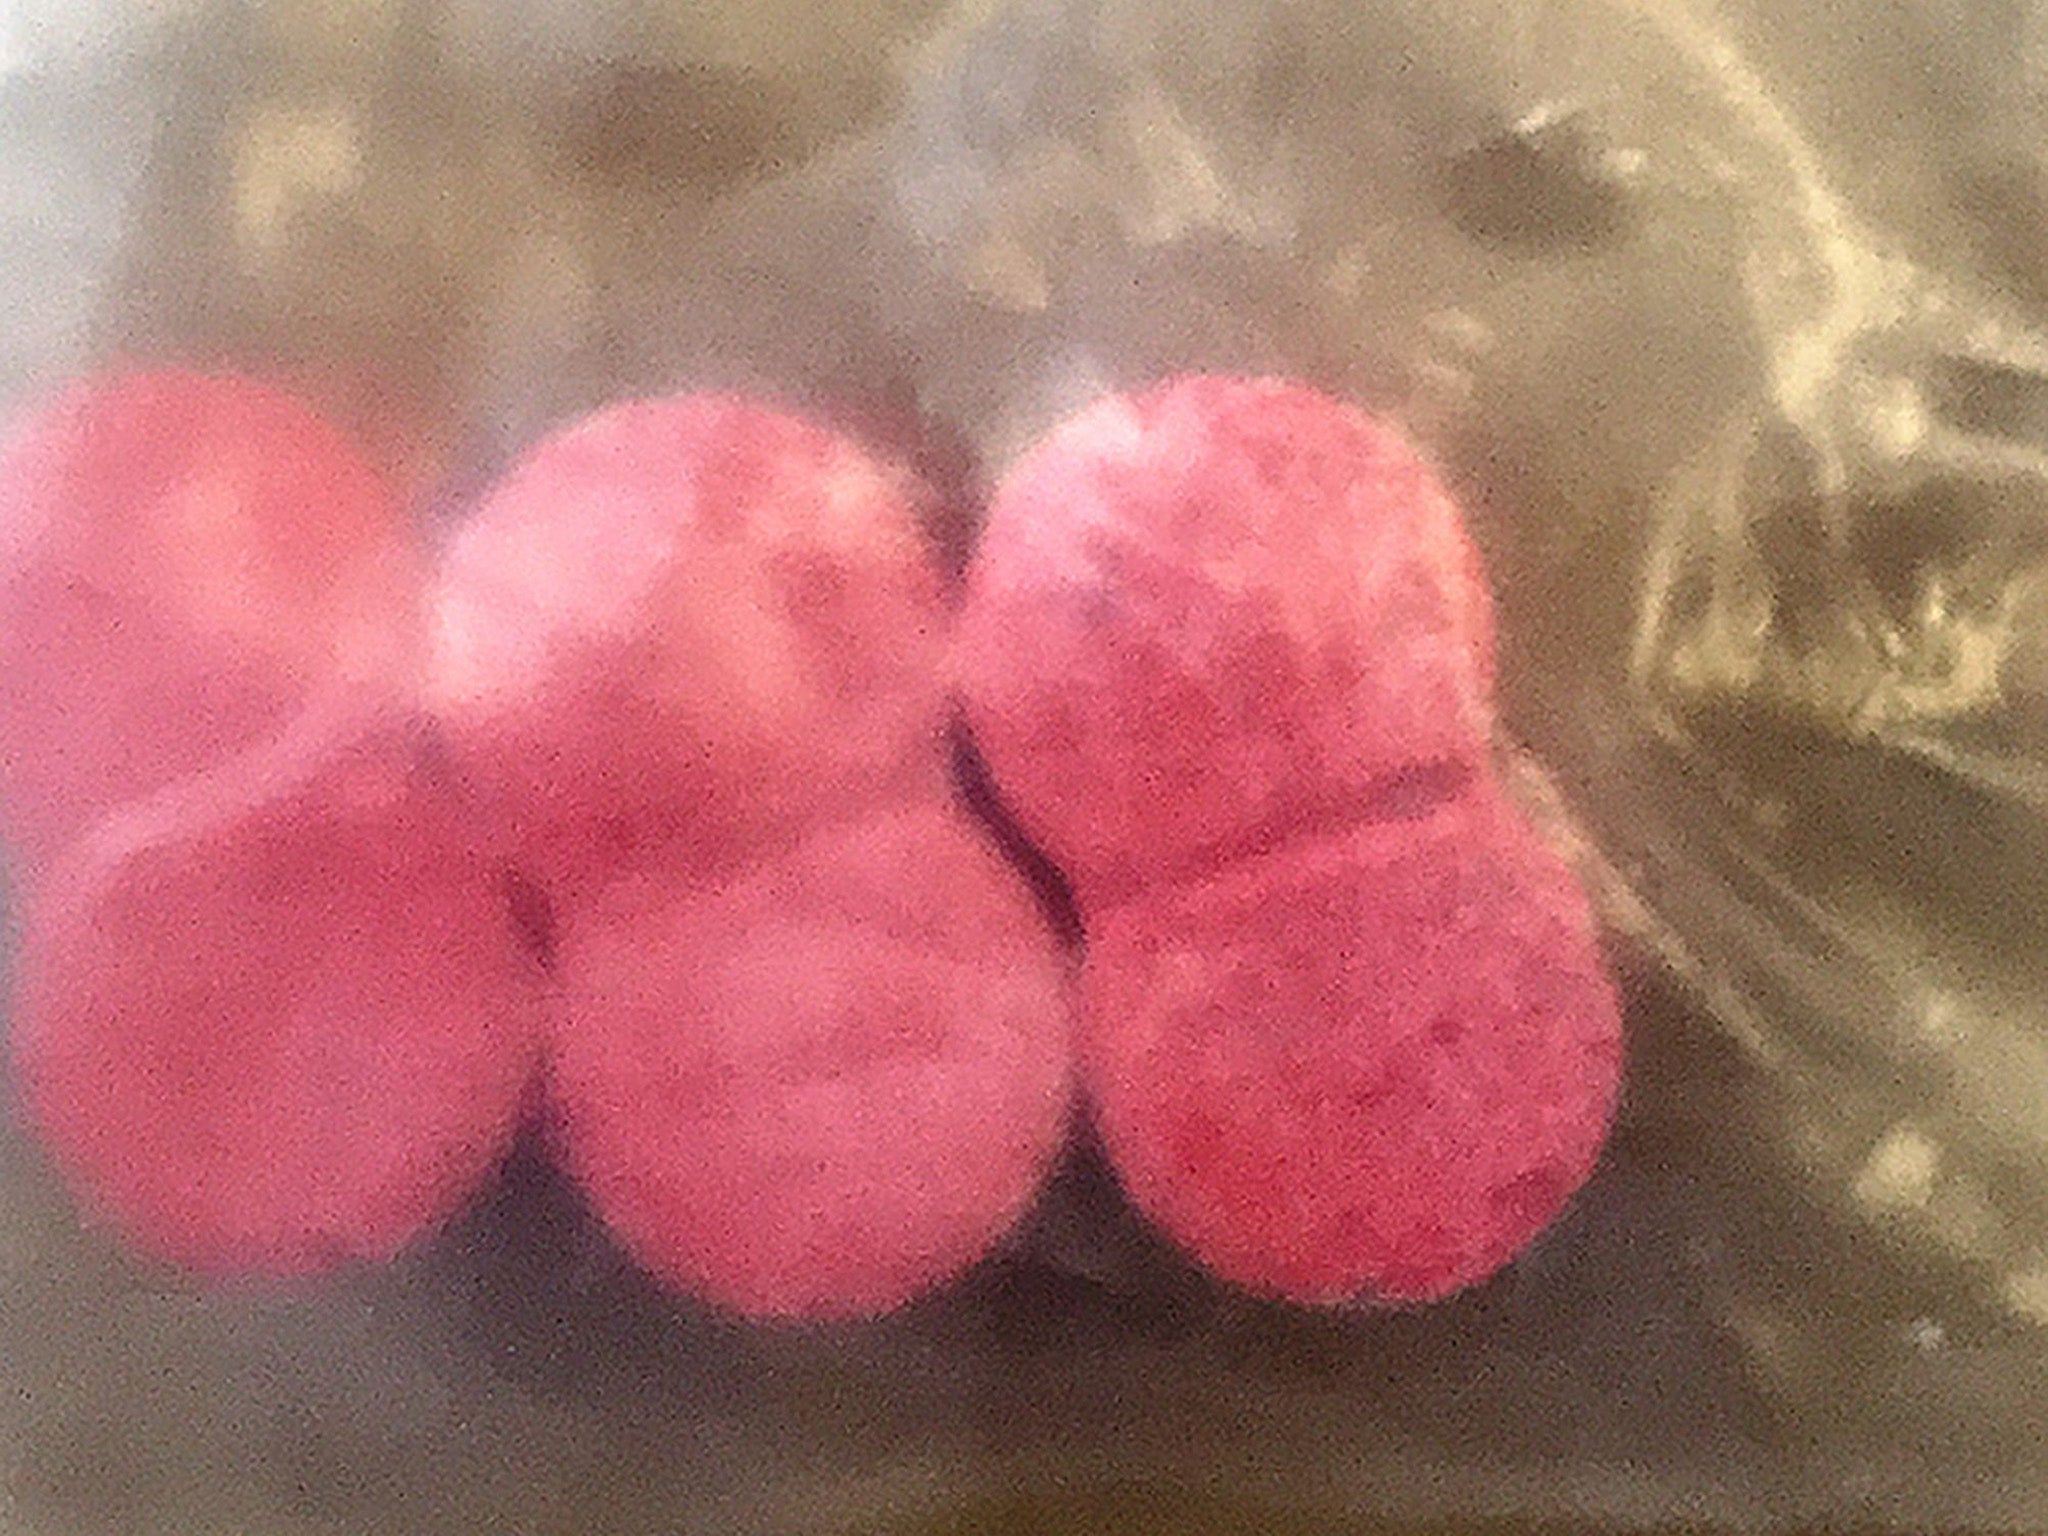 Photo issued by Greater Manchester Police of a batch of ecstasy tablets known as 'MasterCard'